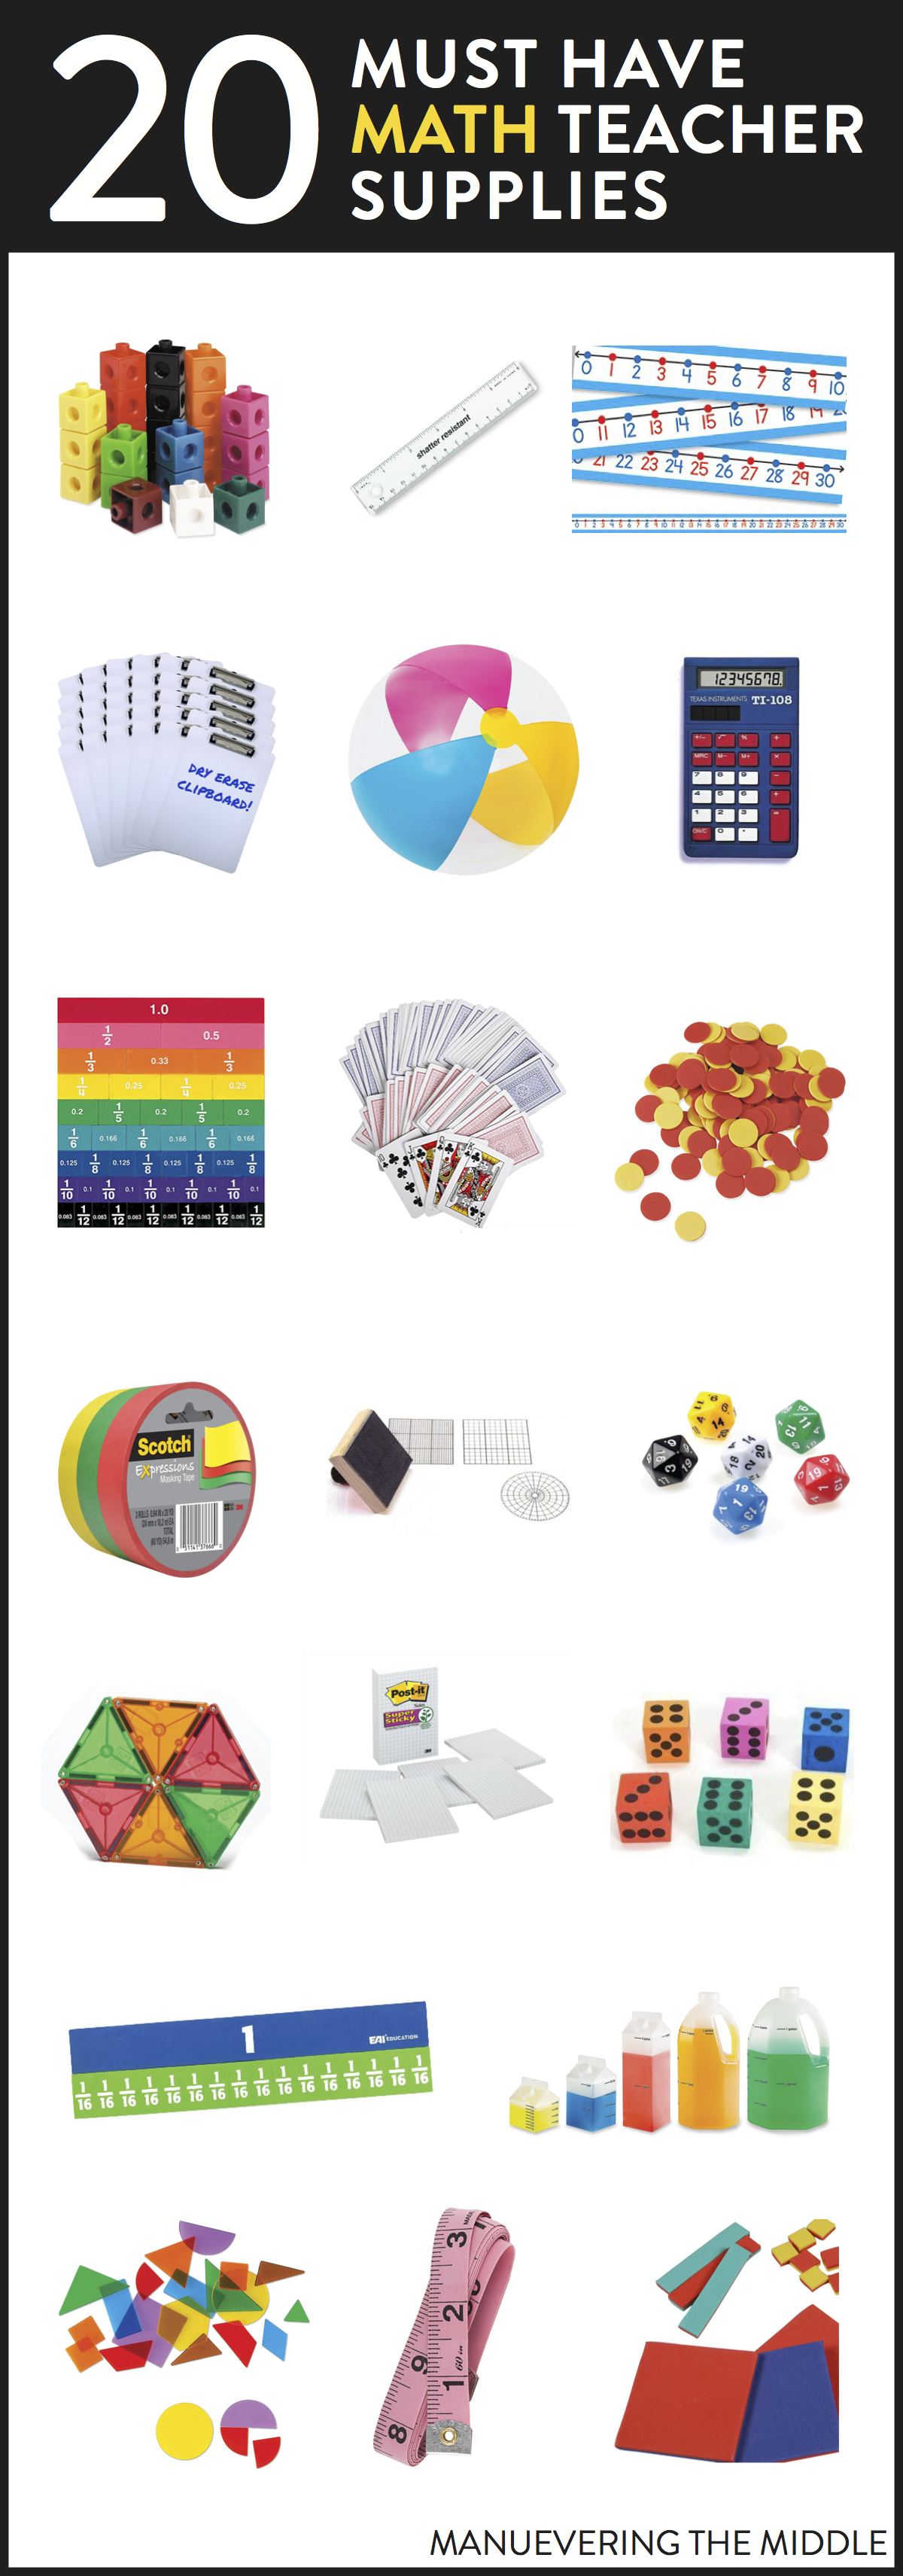 20 Supplies for the math classroom. - Must have math teacher supplies to stock your classroom! | maneuveringthemiddle.com